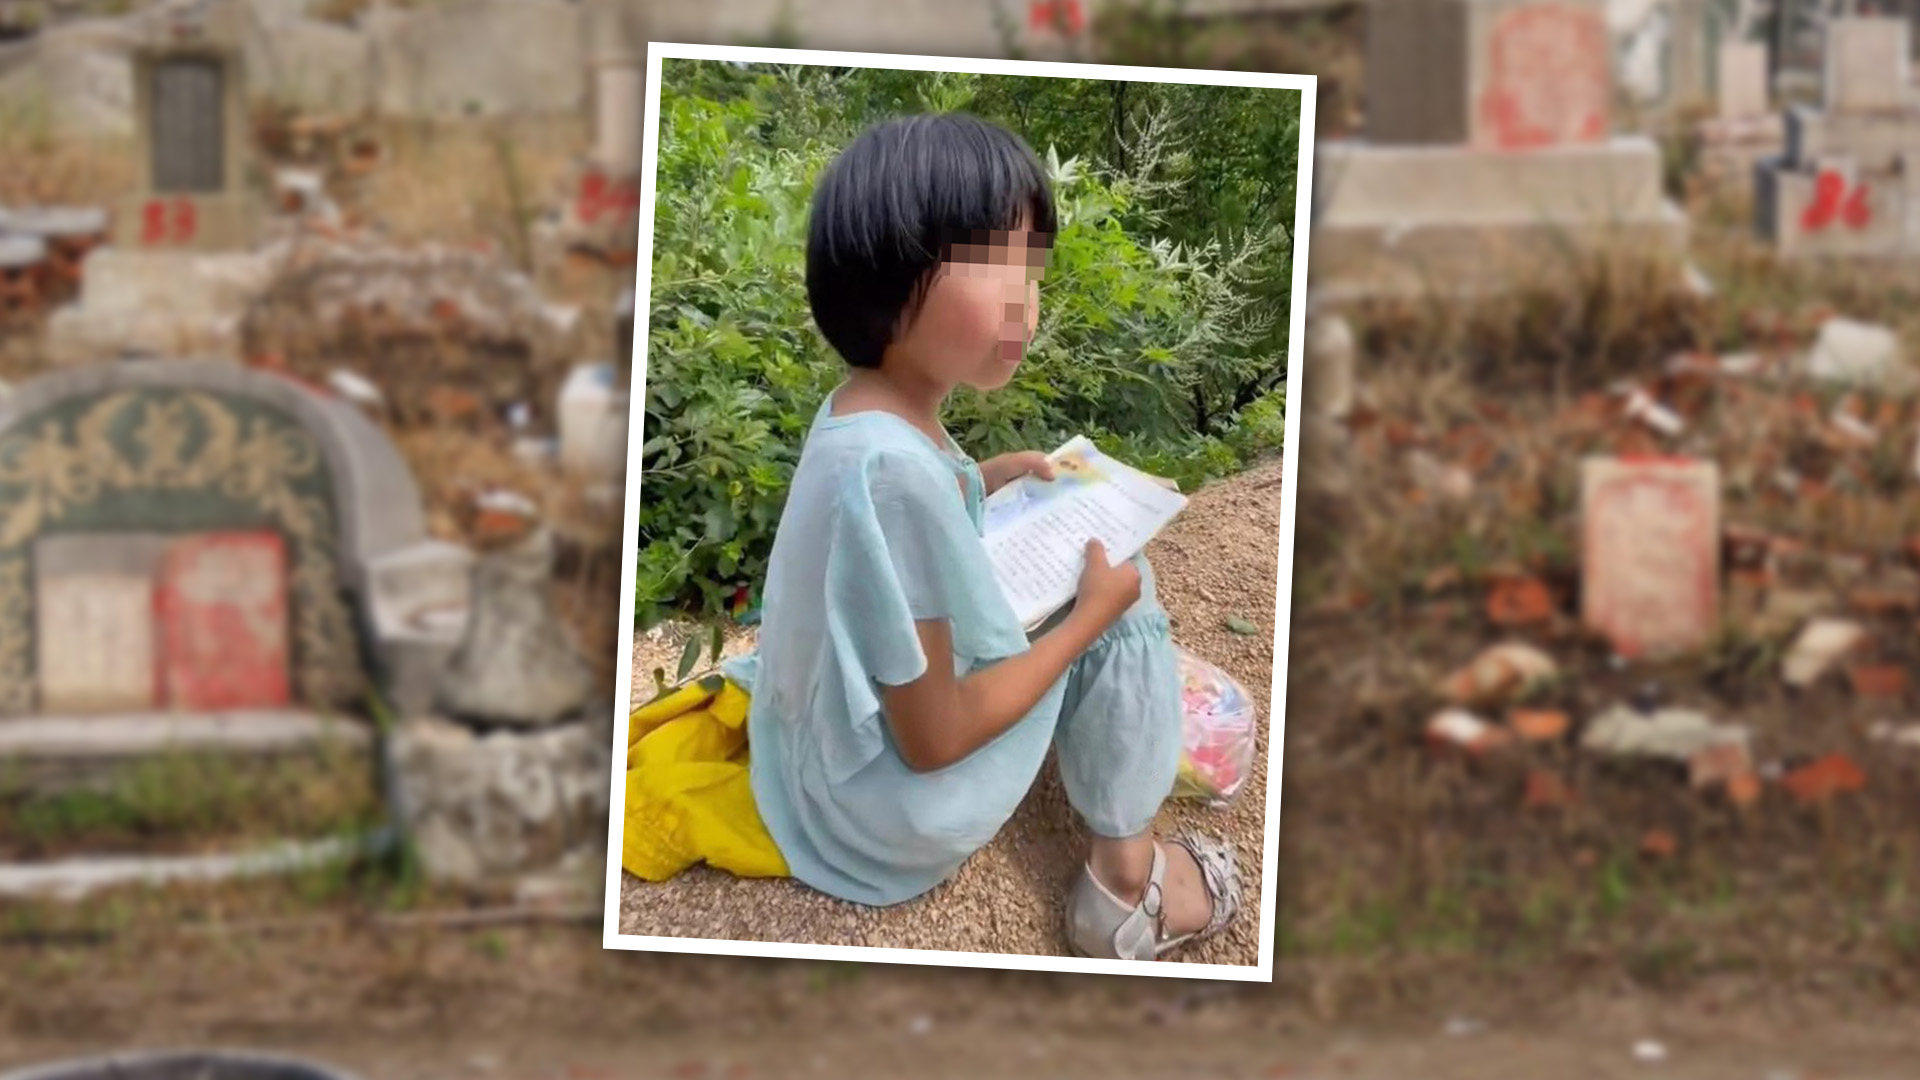 Video of a little girl in China sitting beside her father’s grave reading him stories has touched the hearts of many on mainland social media. Photo: SCMP composite/Weibo